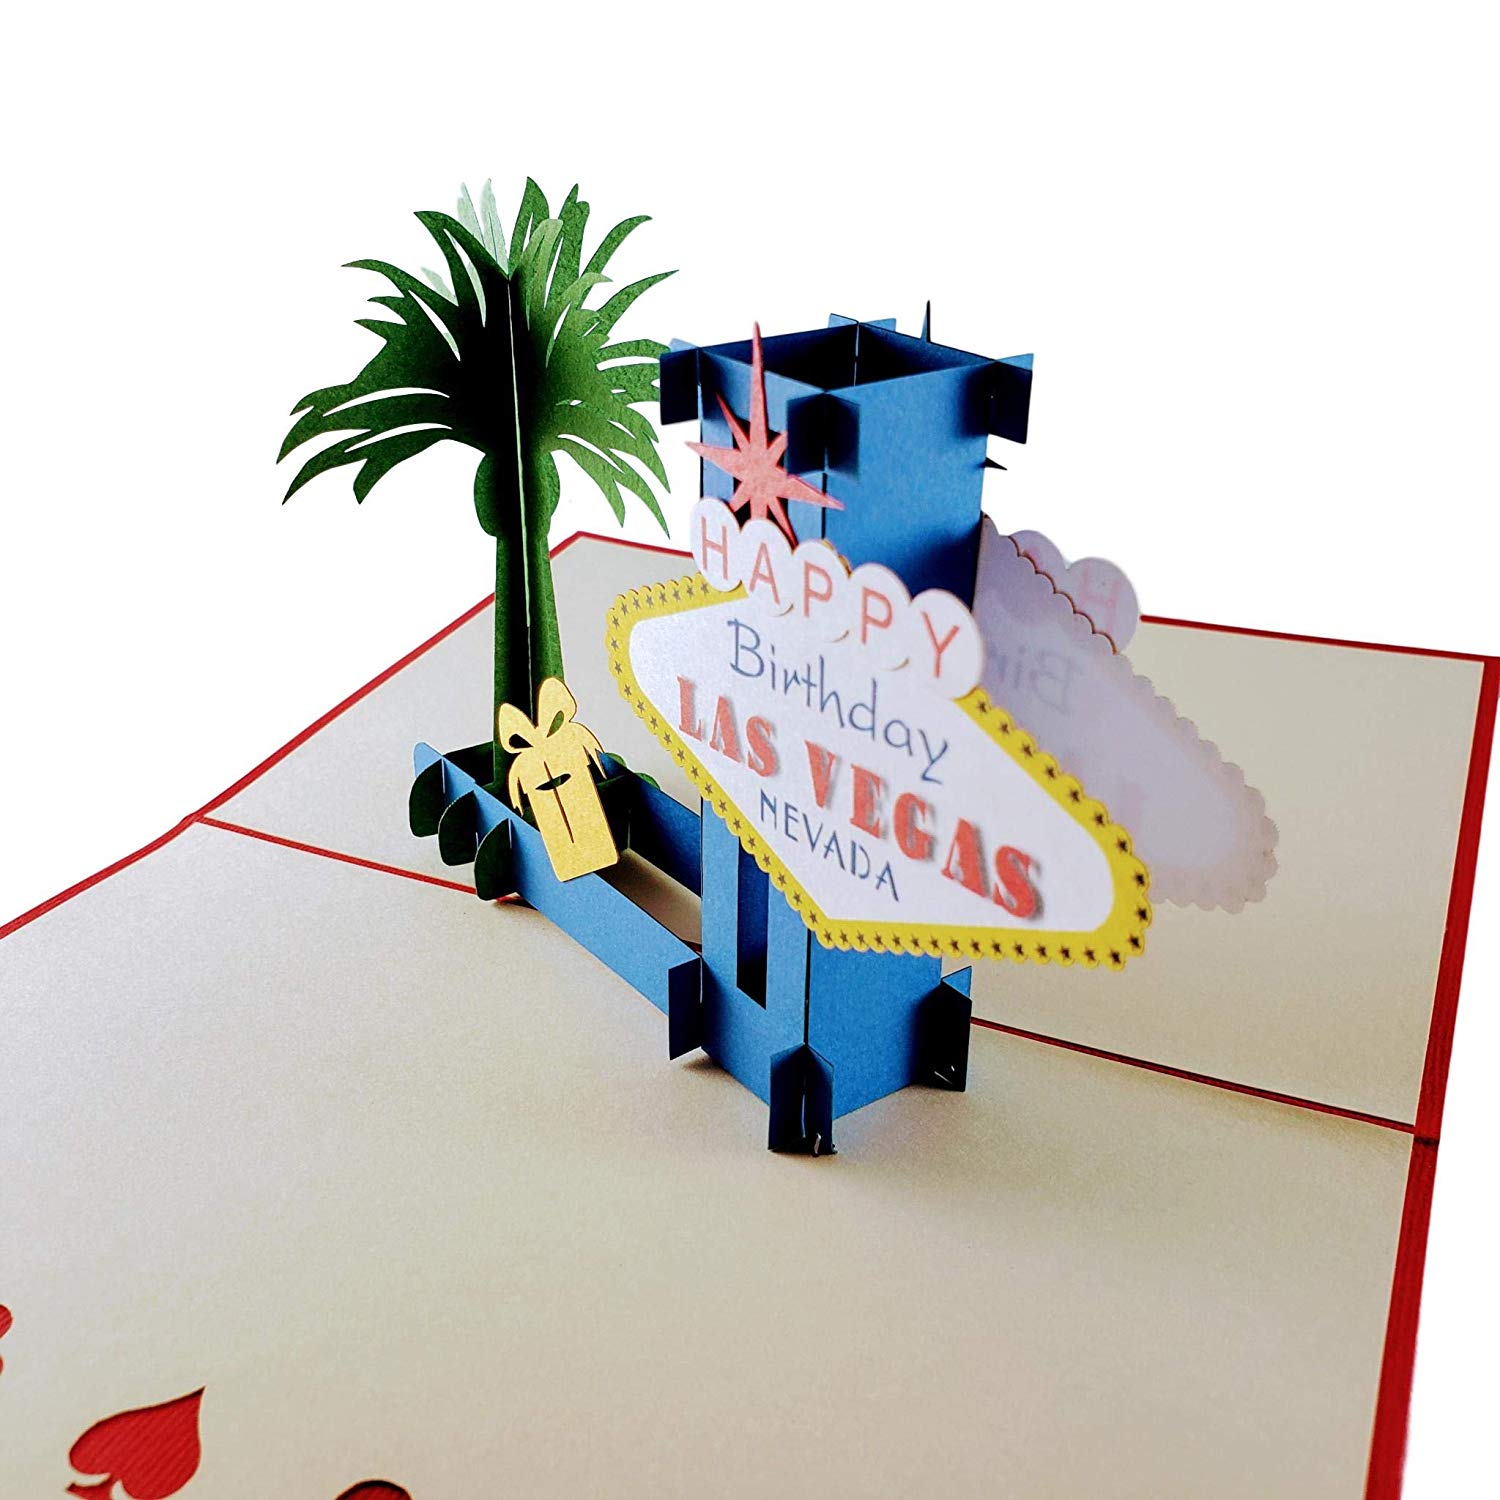 Happy Birthday Red Cover Las Vegas 3D Pop Up Greeting Card - Birthday - iGifts And Cards